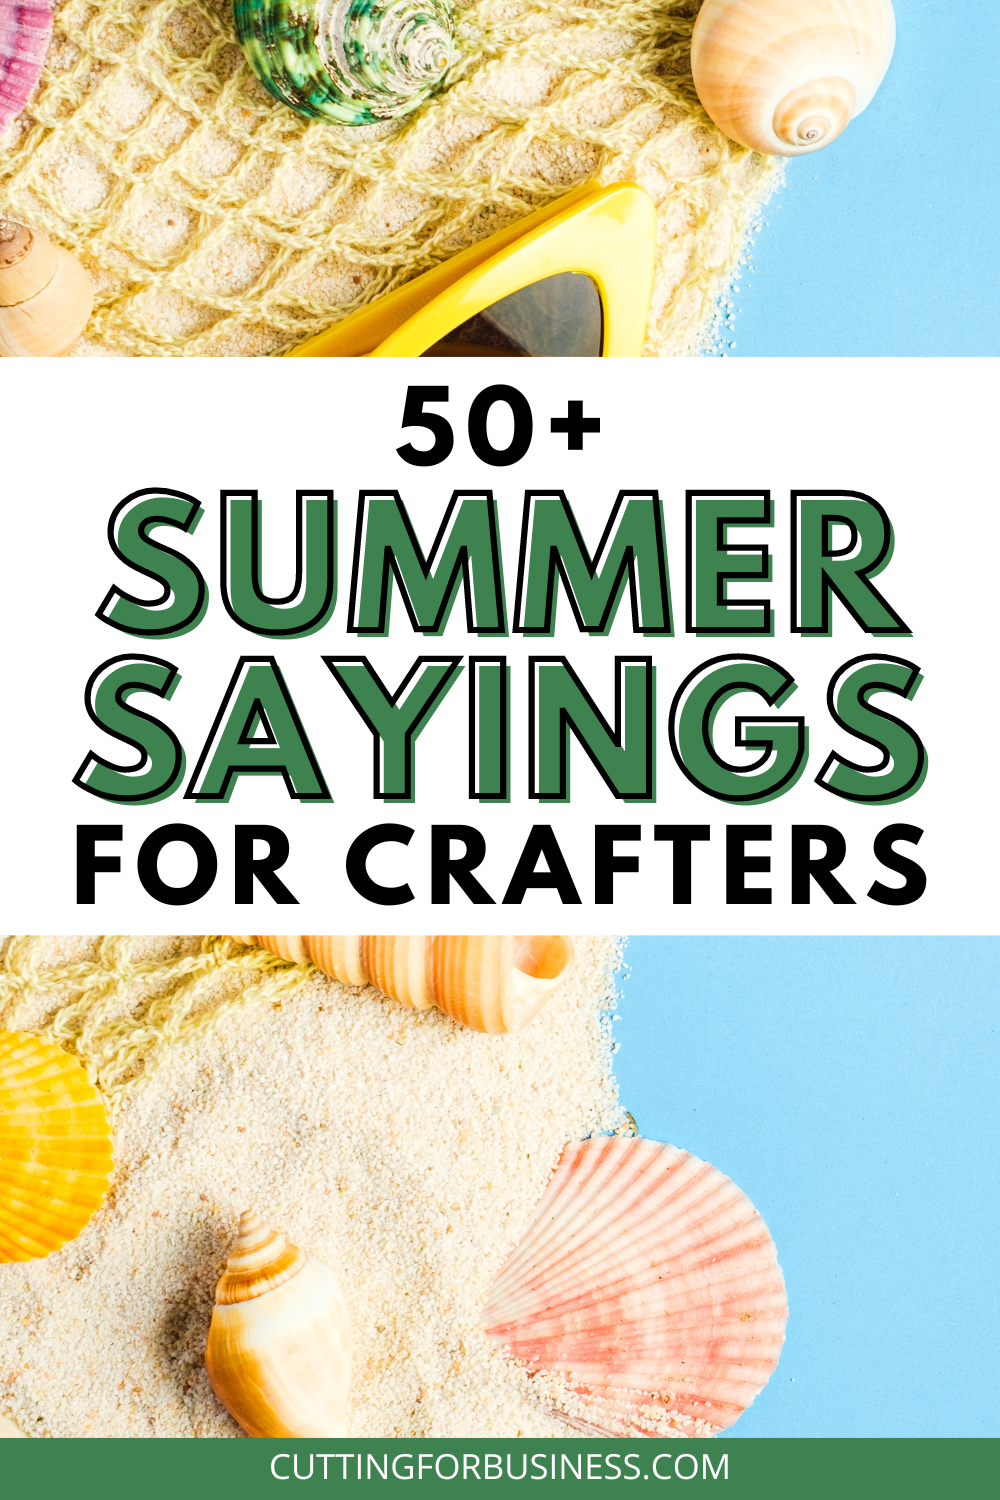 50+ Summer Sayings for Crafters - cuttingforbusiness.com